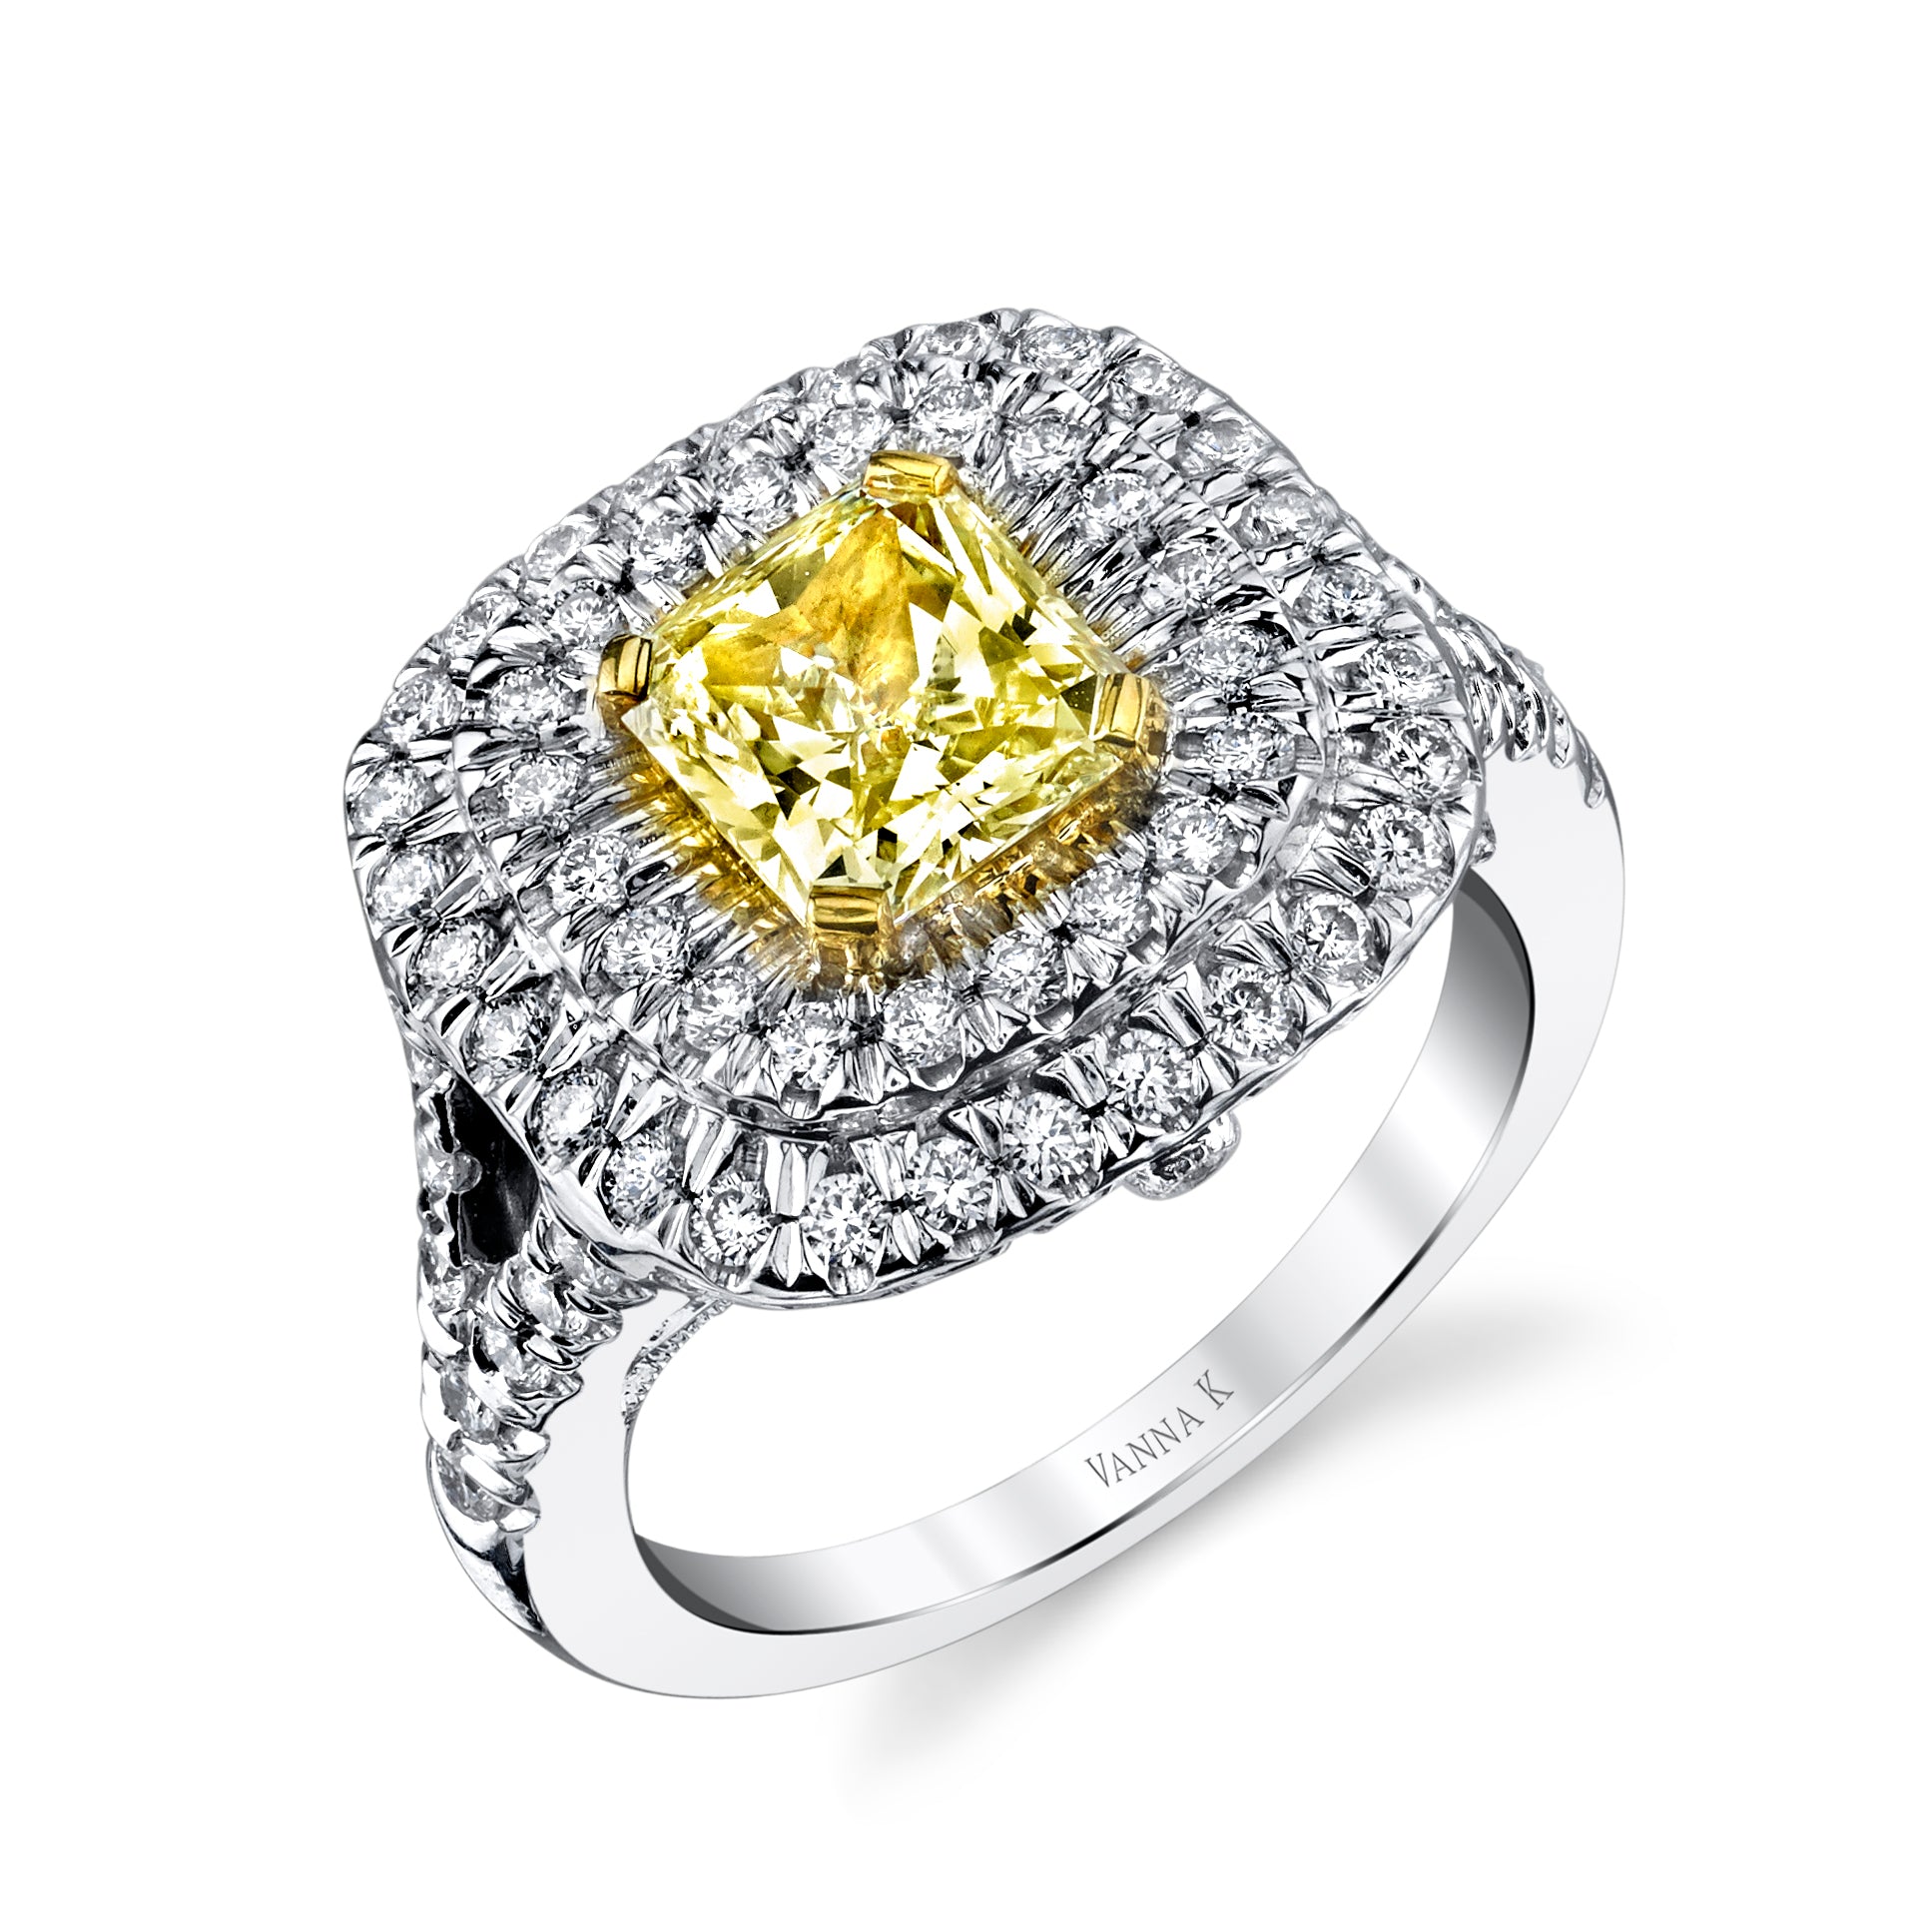 Soleamore Unique Rare Yellow Diamond Ring Style 18RGL746DY